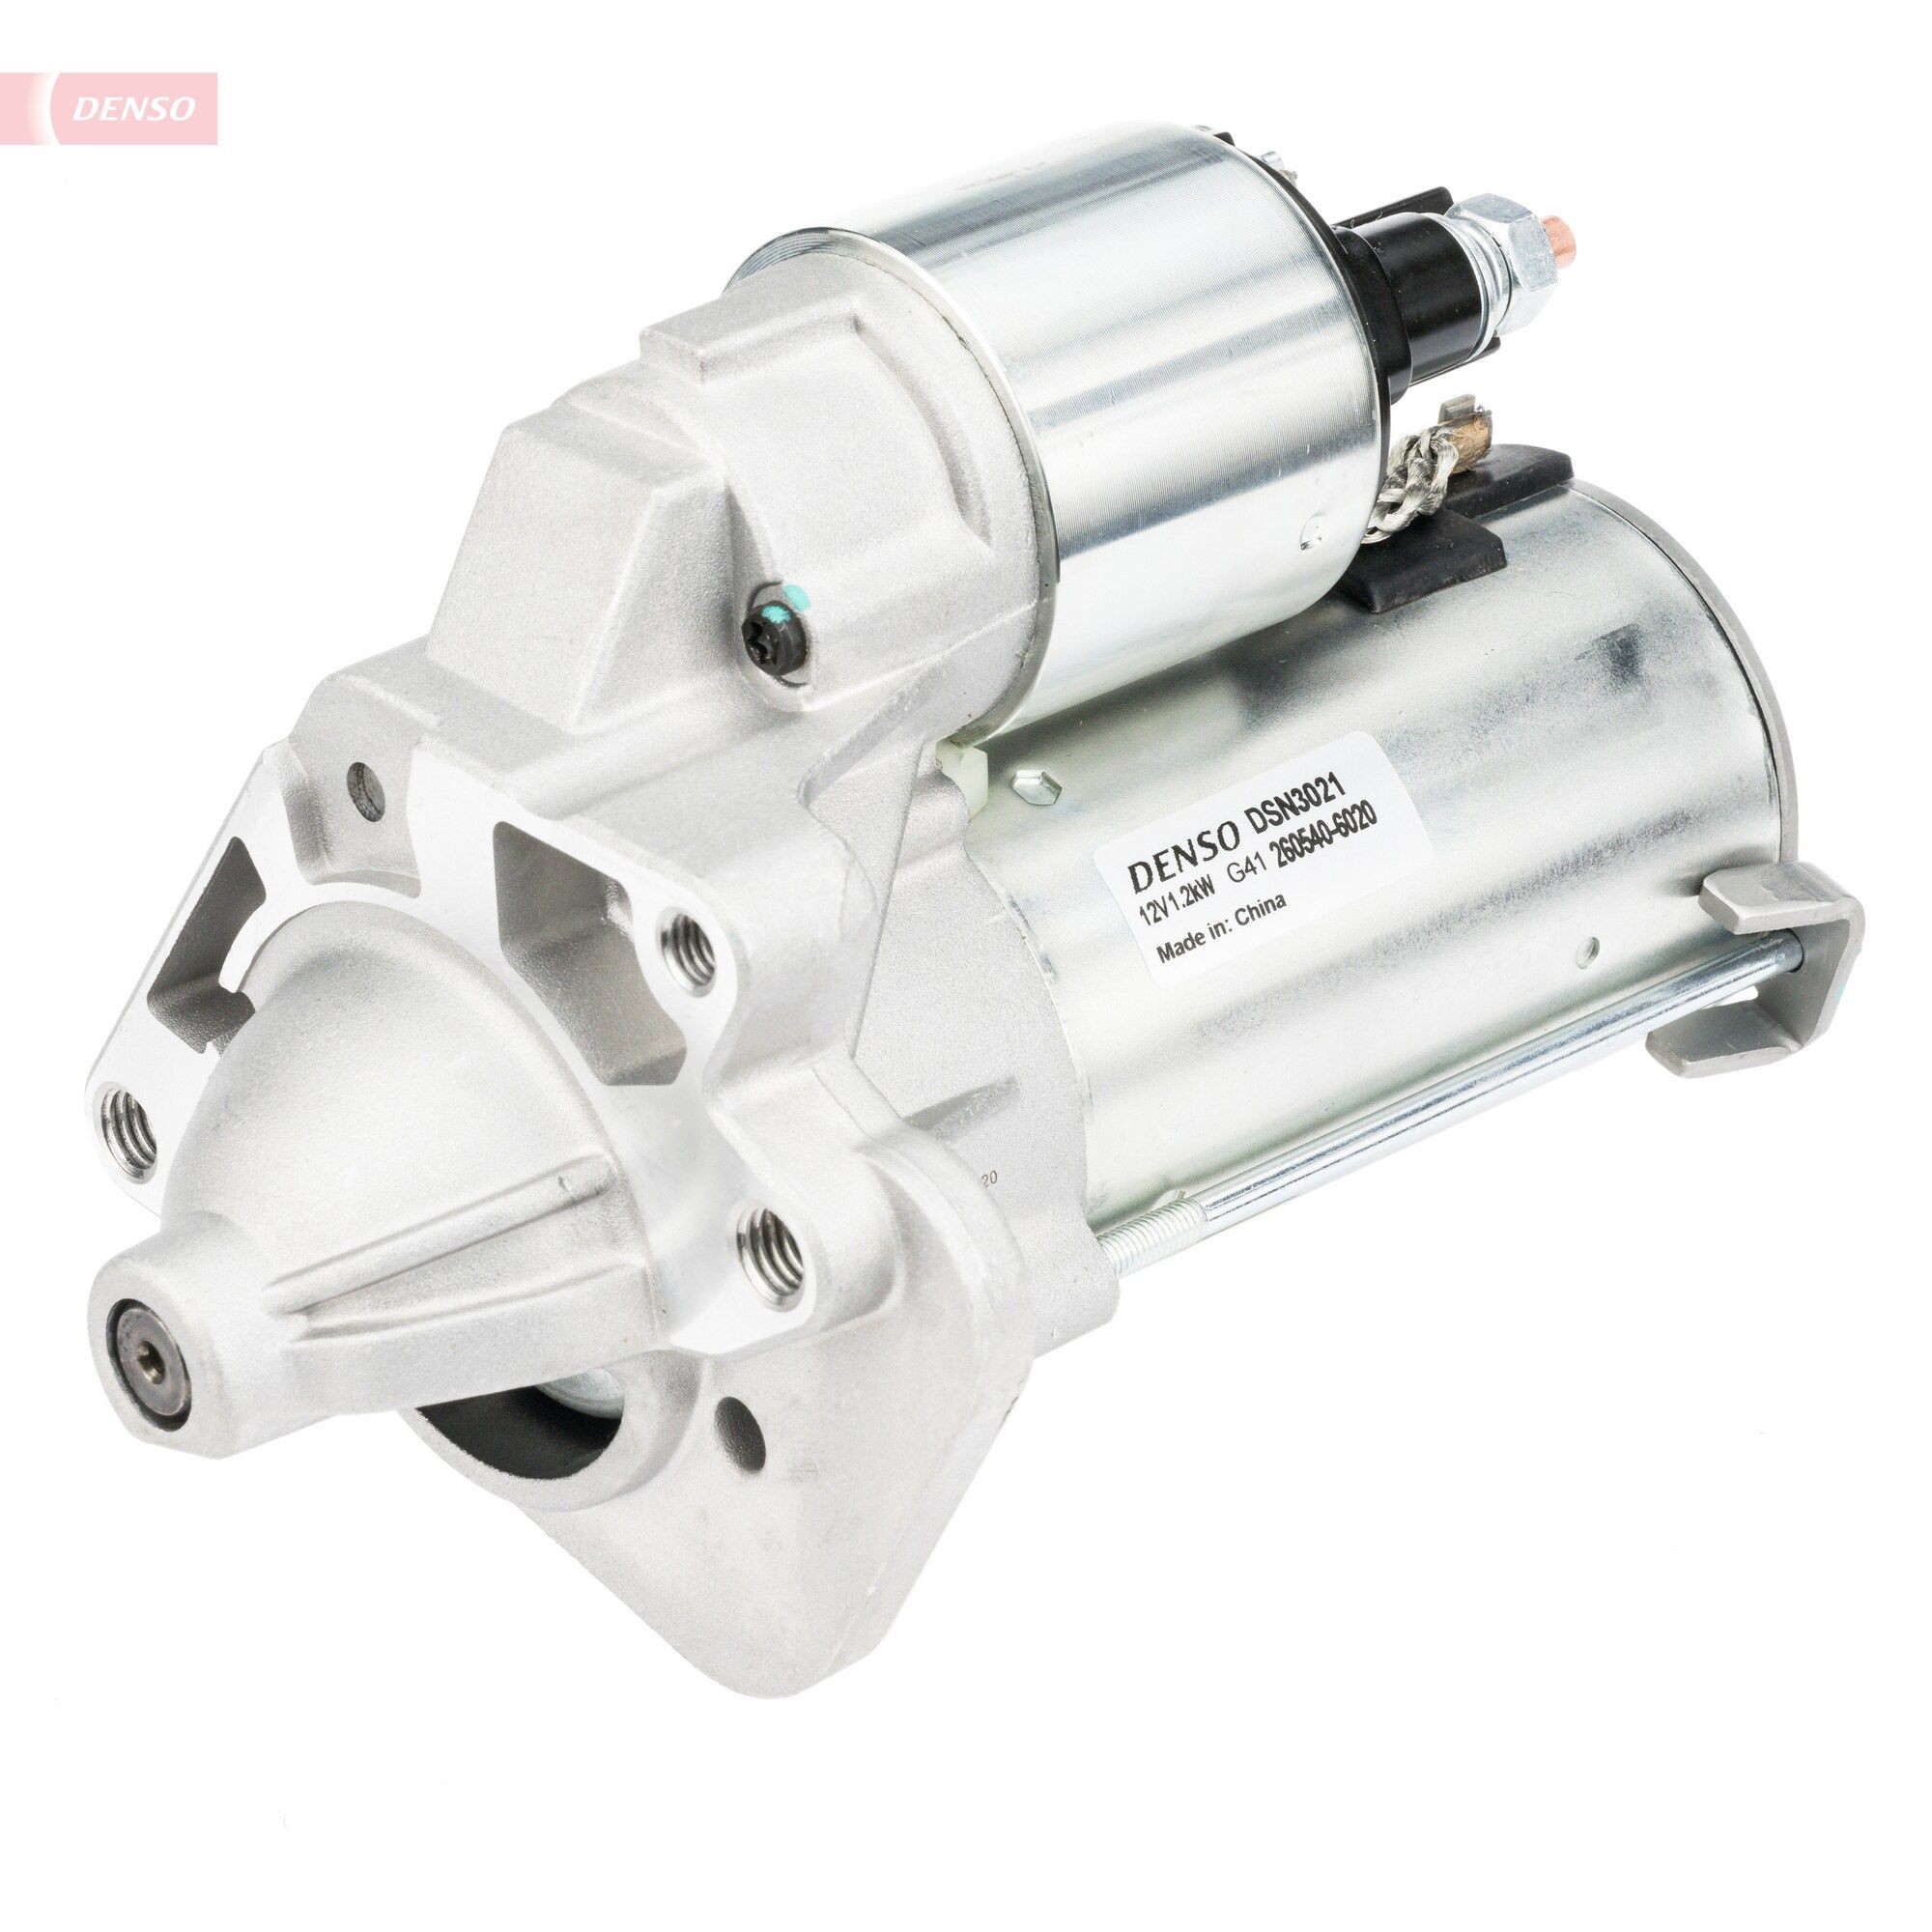 DENSO DSN3021 Starter motor RENAULT experience and price